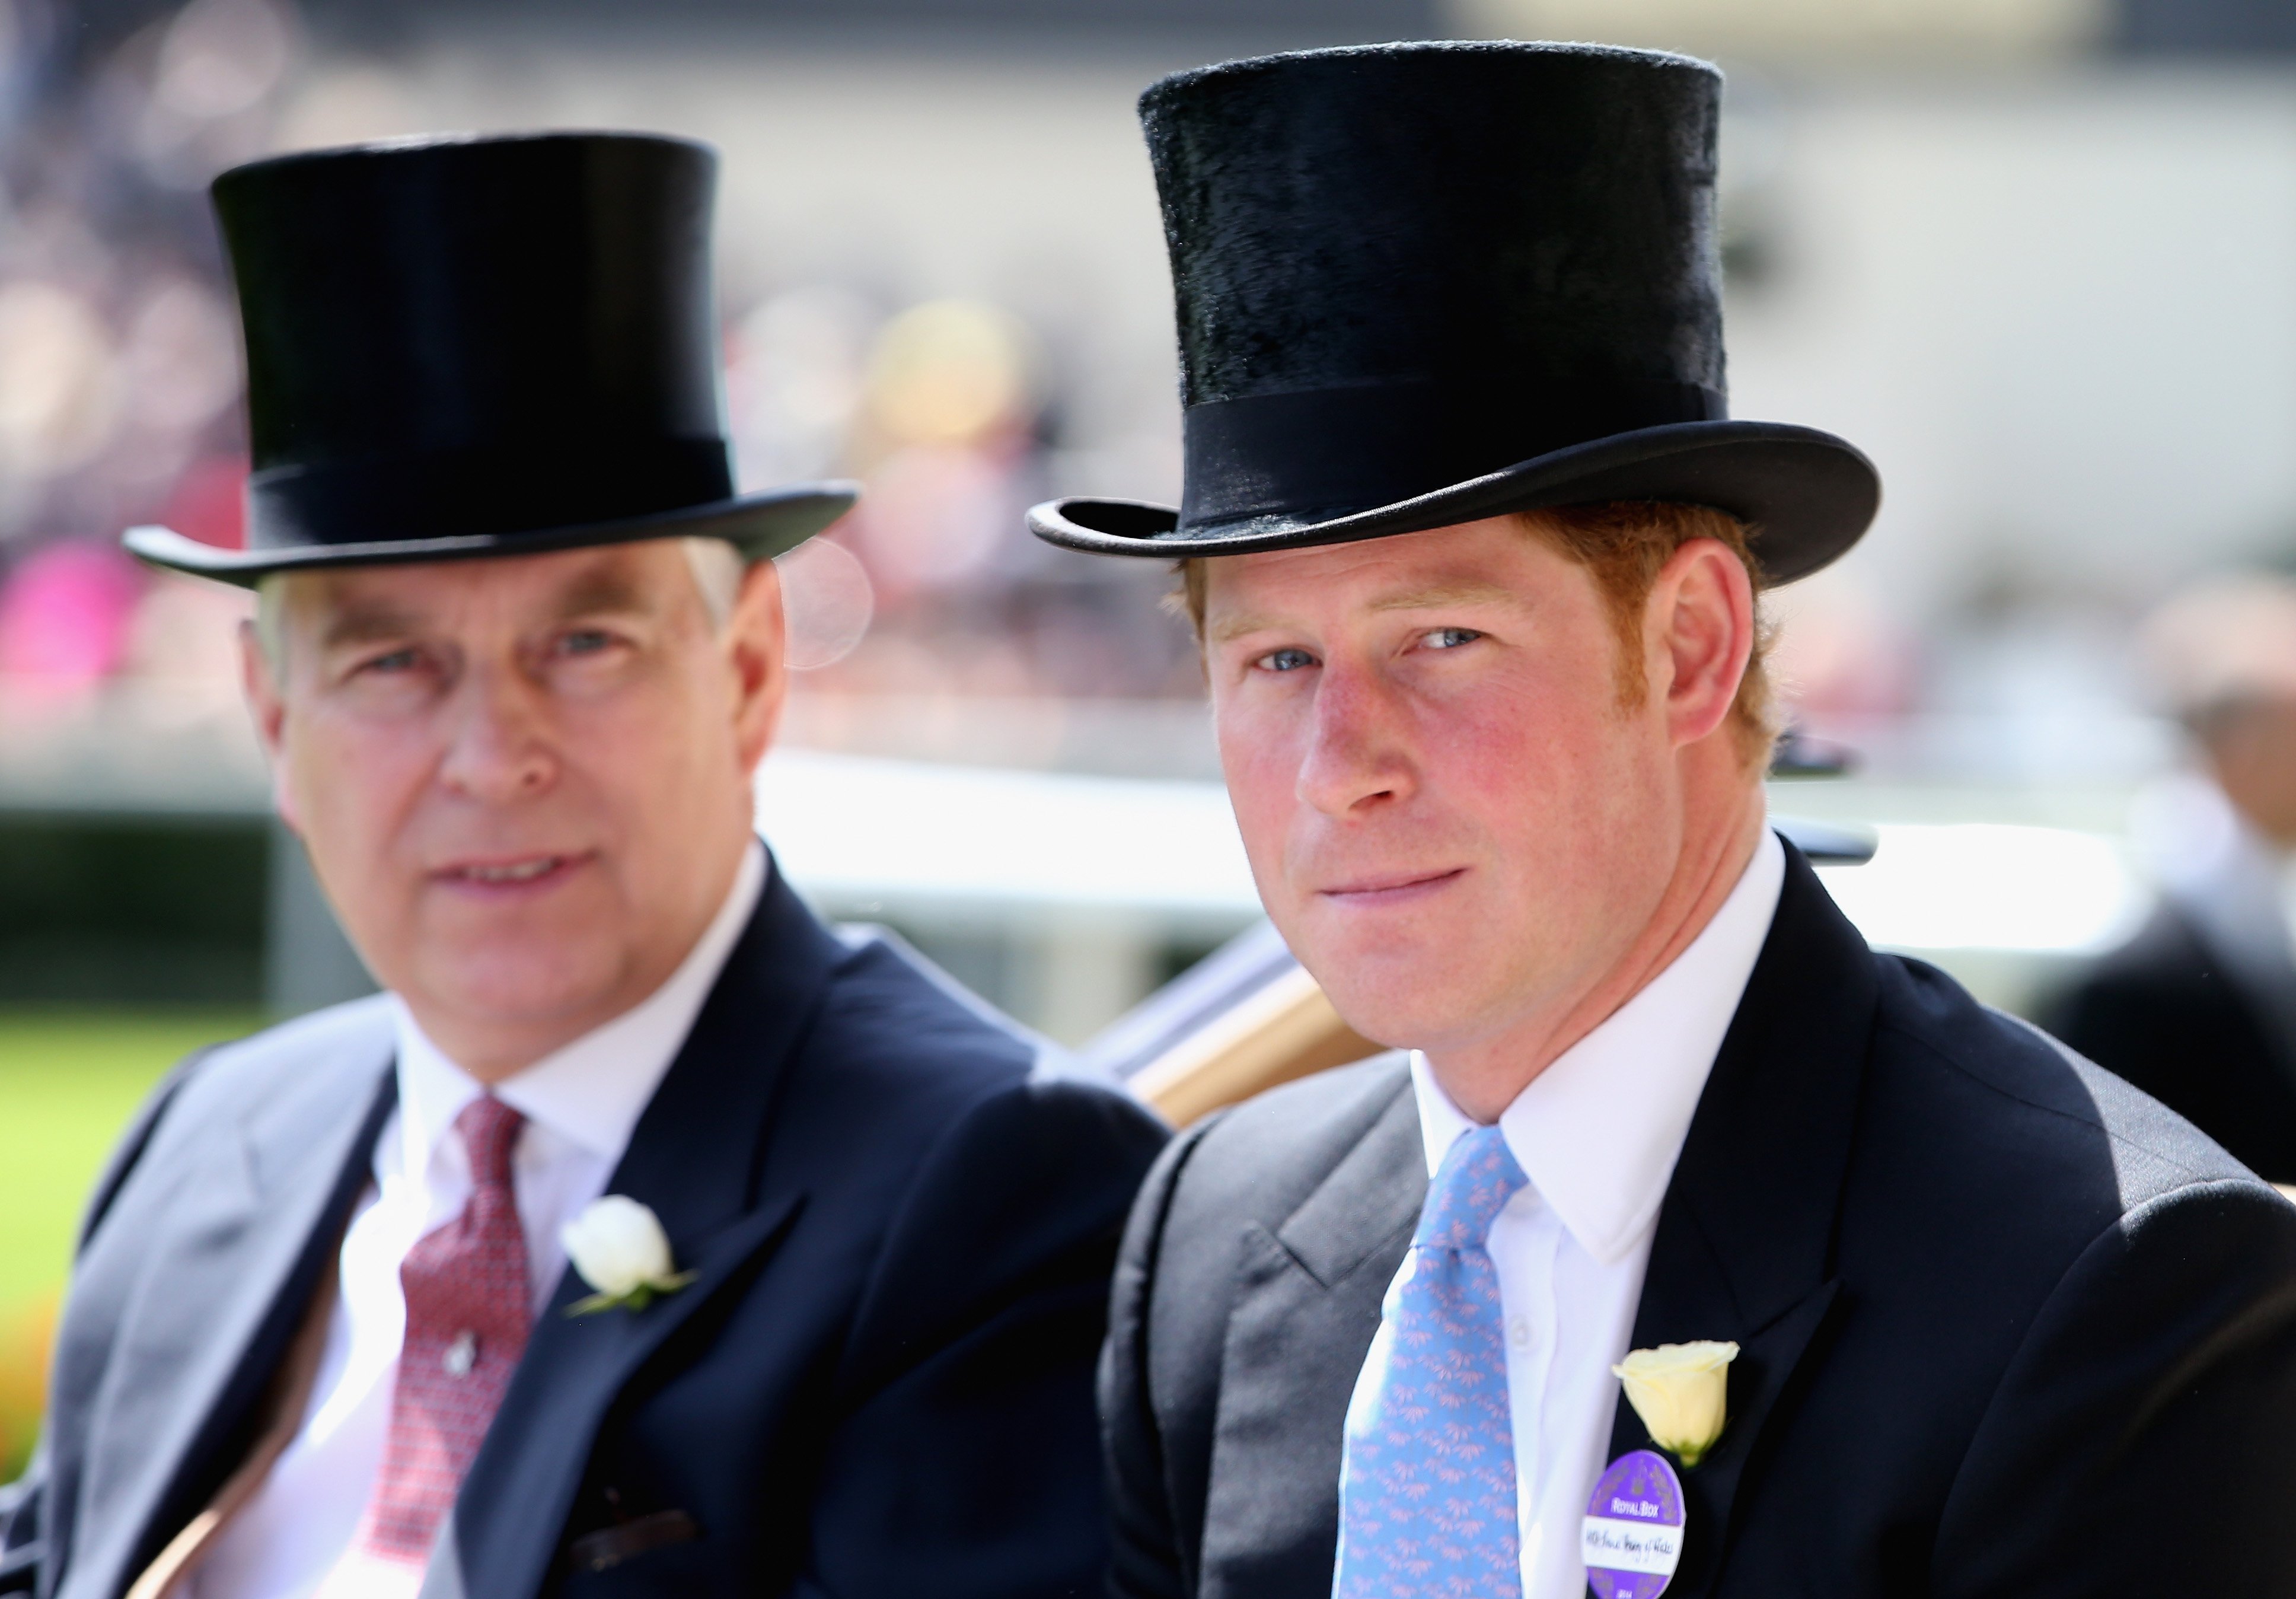 Prince Andrew and Prince Harry riding in a carriage to attend day one of Royal Ascot